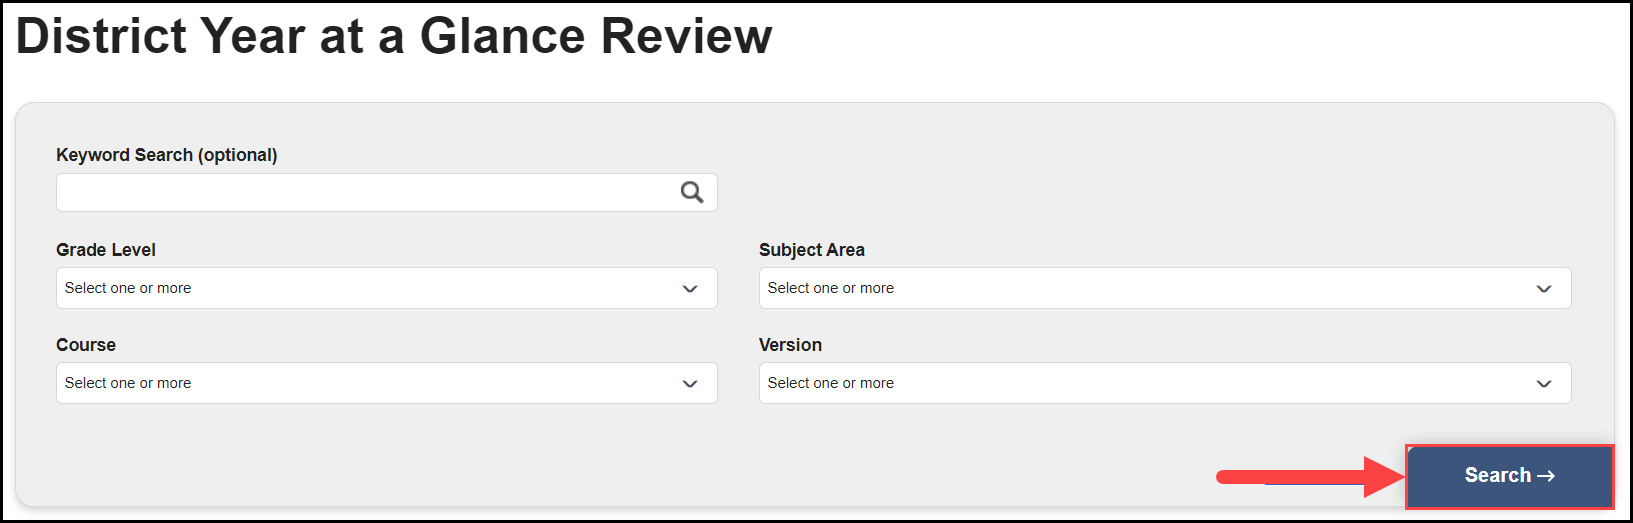 district yag review search filters with an arrow pointing to the search button